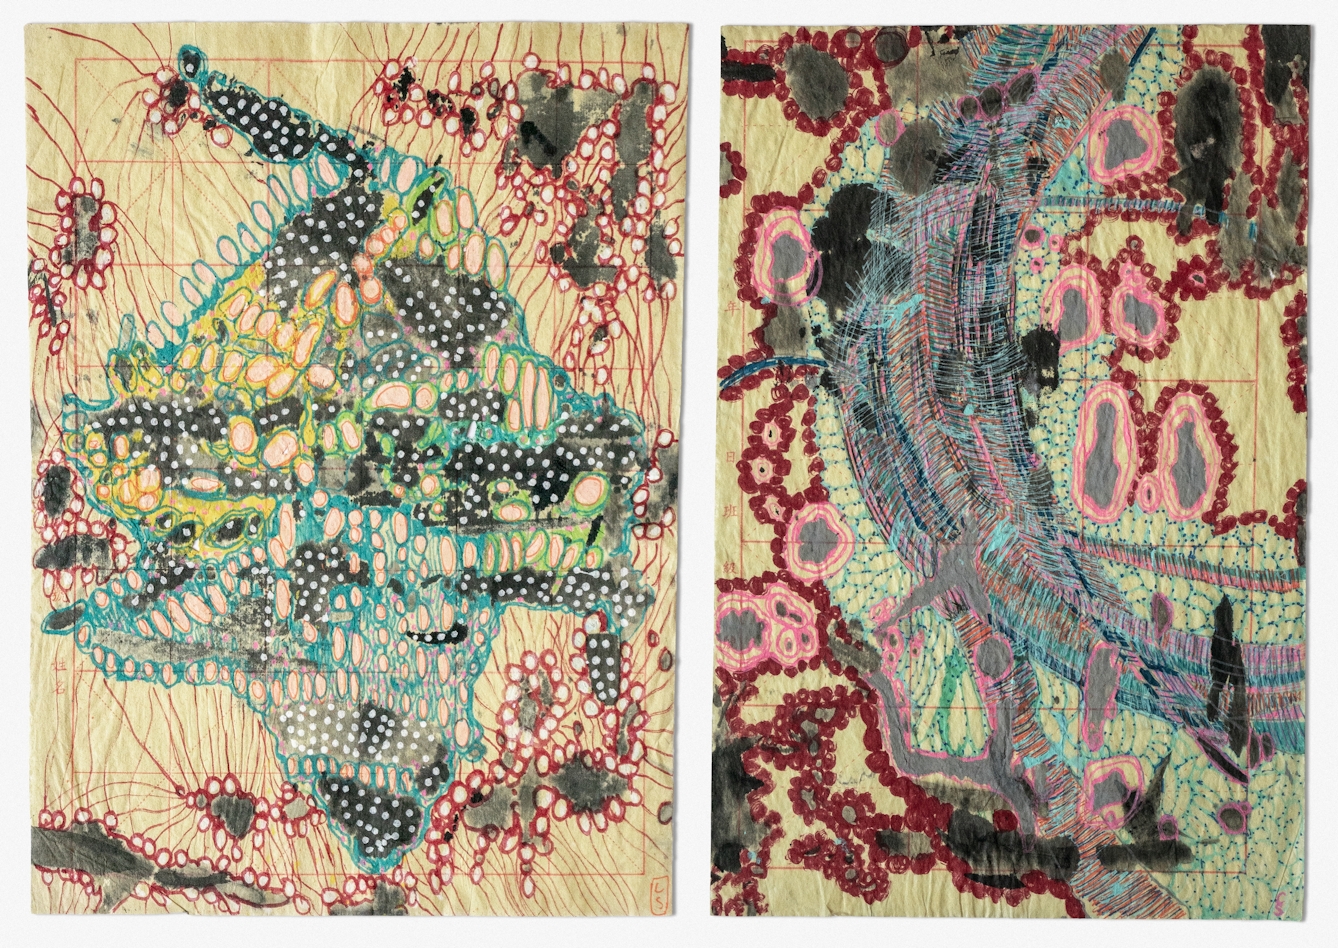 Photographic diptych of two abstract drawings on pink gridded Chinese calligraphy paper that is slightly crumpled and folded. On the left is an abstract mass of densely packed hollow circles, the majority with a blue outline but a number with a yellow or green outline. Contained within the mass of circles, and connecting the circles into a single mass, are a number of dark, black ink splodes filled with white dots. Lots of thin, crimson lines are extending from the central shape, and leading to smaller abstract masses comprised of grey-black inky splodges surrounded by small crimson circles. The crimson lines extend from these shapes and off the page. On the right is a large arched shape extending through the page from top to bottom comprised of tiny etching marks or brushstrokes in black, blue and pink. Surrounding the central shape are a number of grey, cell like splodges which a number of pink lines bordering it, with these pink lines surrounded by small crimson dots. There are tiny blue lines dotted with navy or black ink connecting the central shape with the grey cell like splodges. 